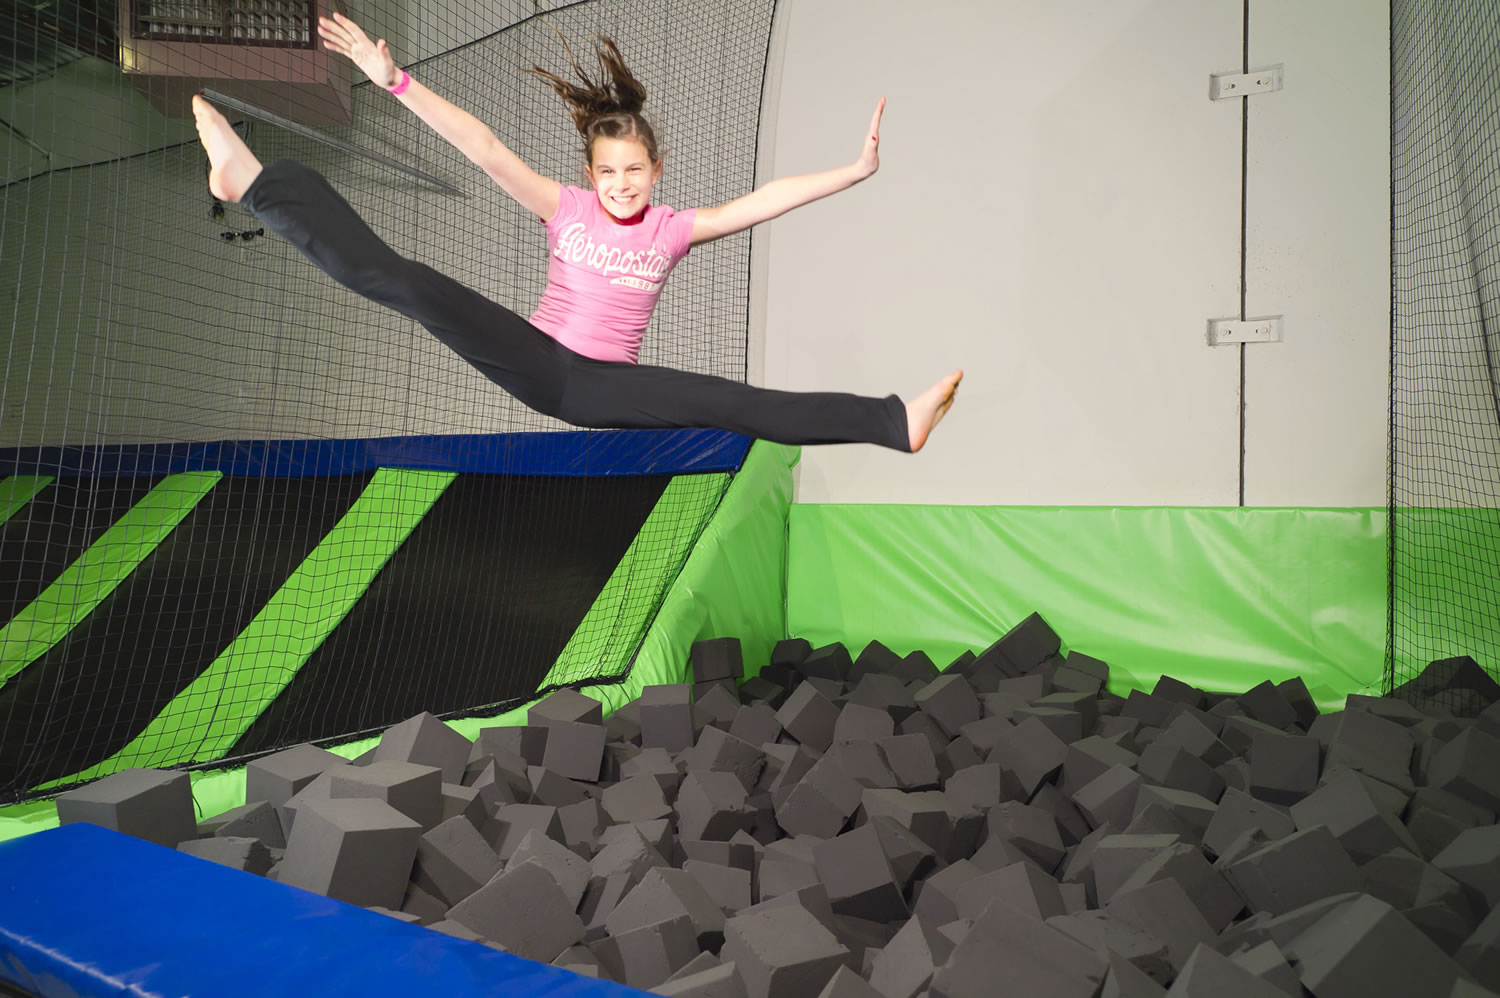 At G6 Airpark, kids can jump on multiple trampoline courts, including courts dedicated to dodgeball and dunking basketballs.